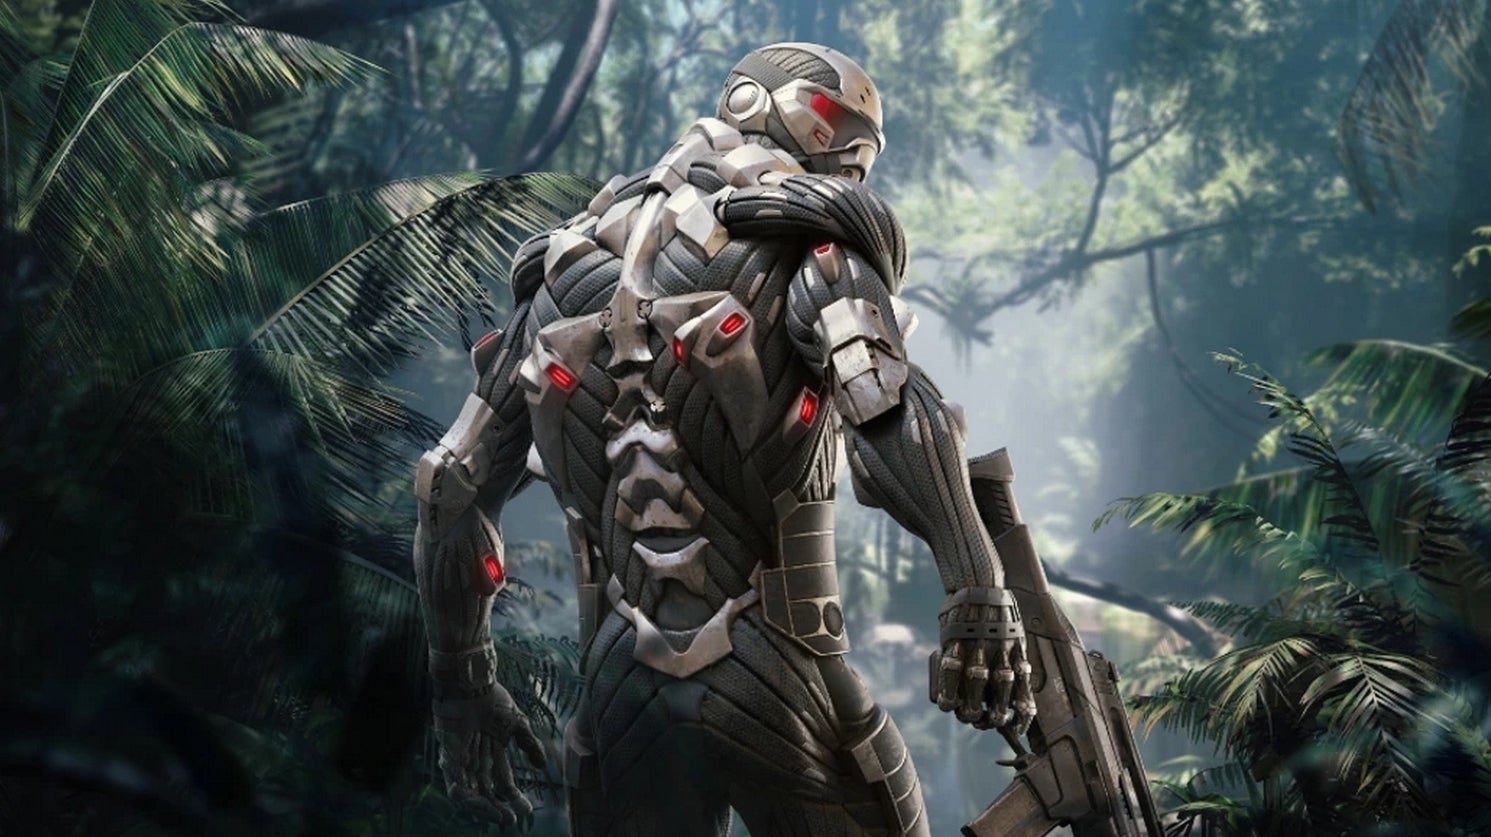 Image for Delayed Crysis Remastered gets revised September release date, tech trailer preview